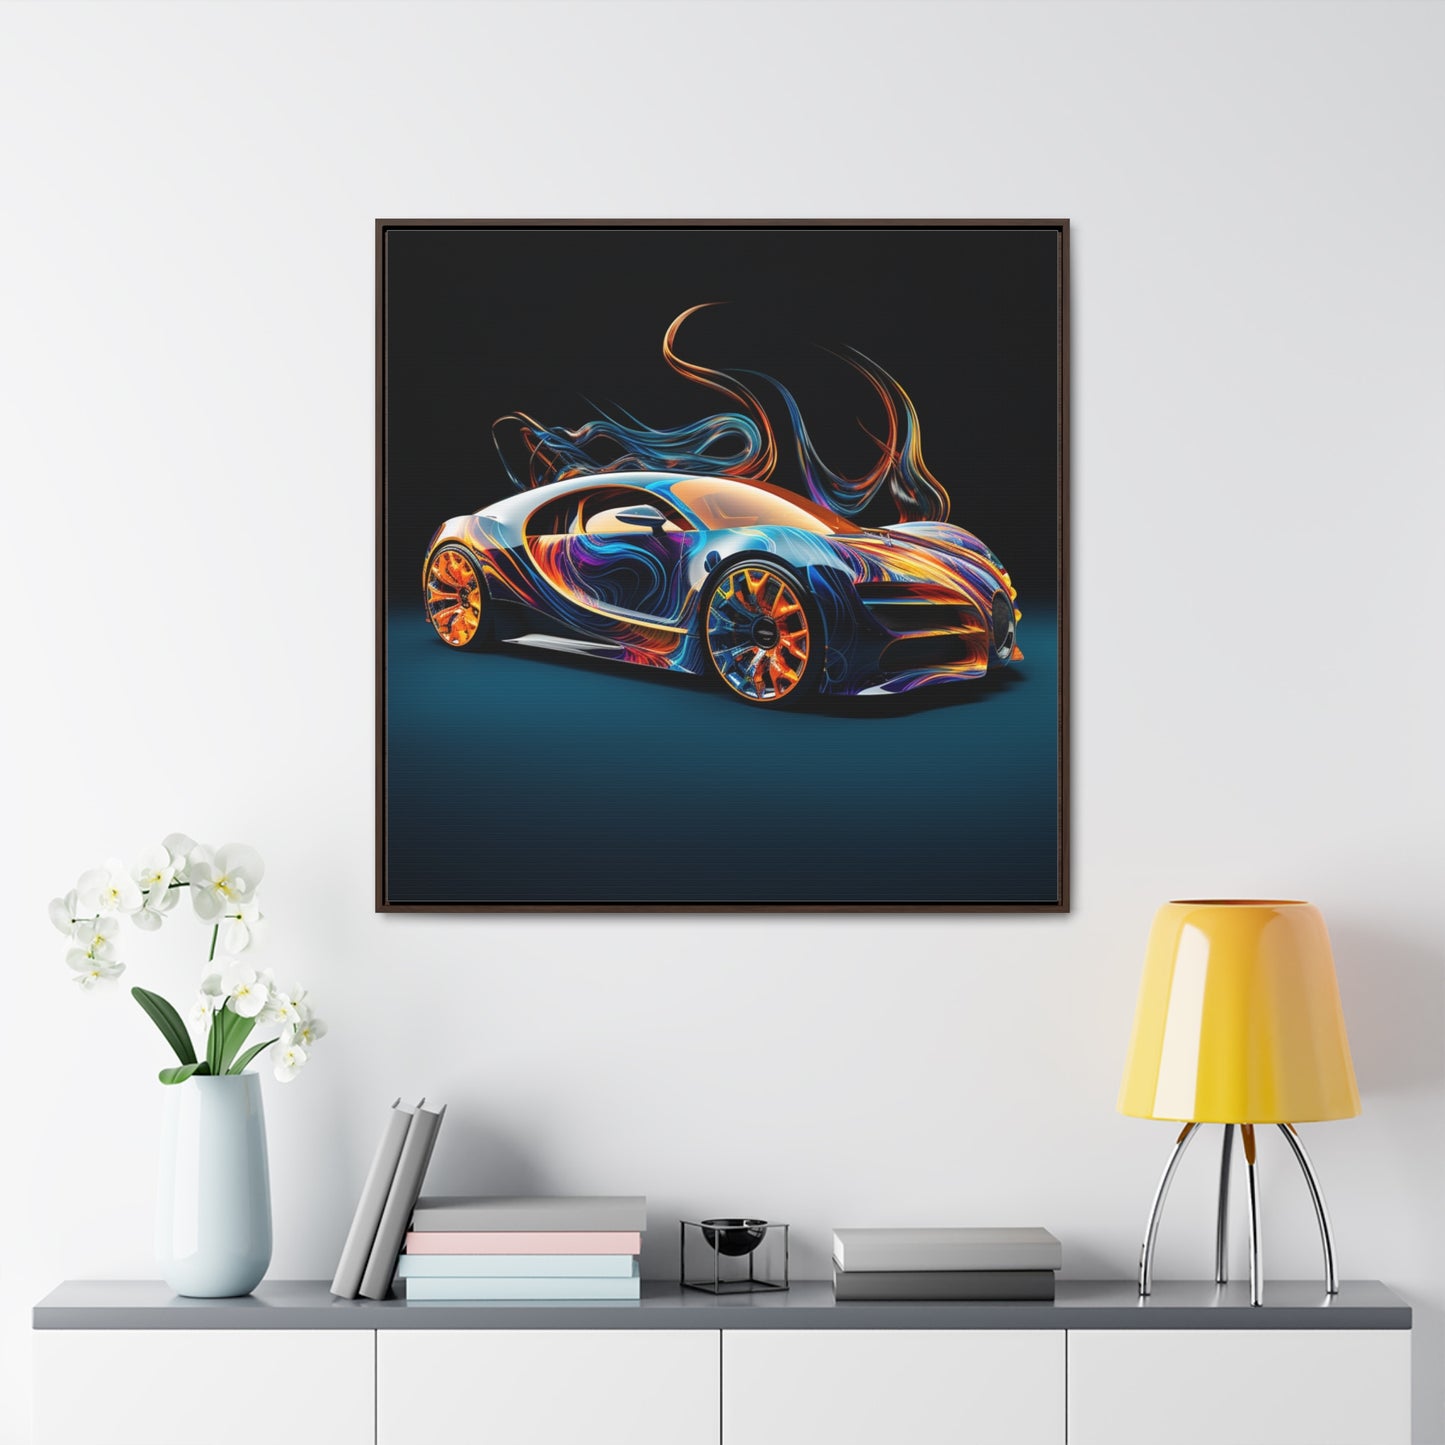 Gallery Canvas Wraps, Square Frame Bugatti Abstract Flair 2